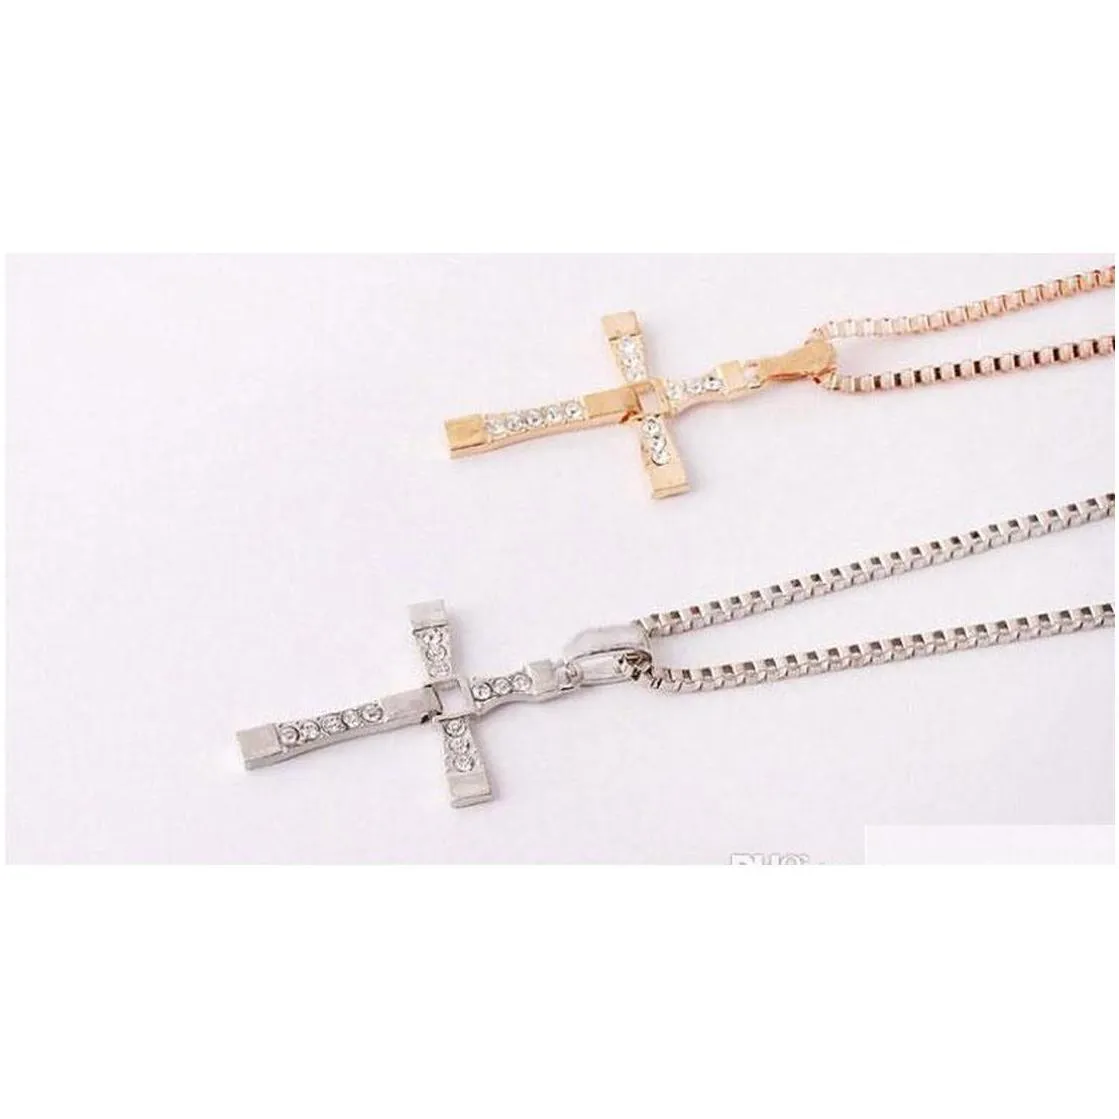 fast and furious cross necklaces actor toledo diamond charm pendant silver or gold statement necklace men jewelry christmas gifts